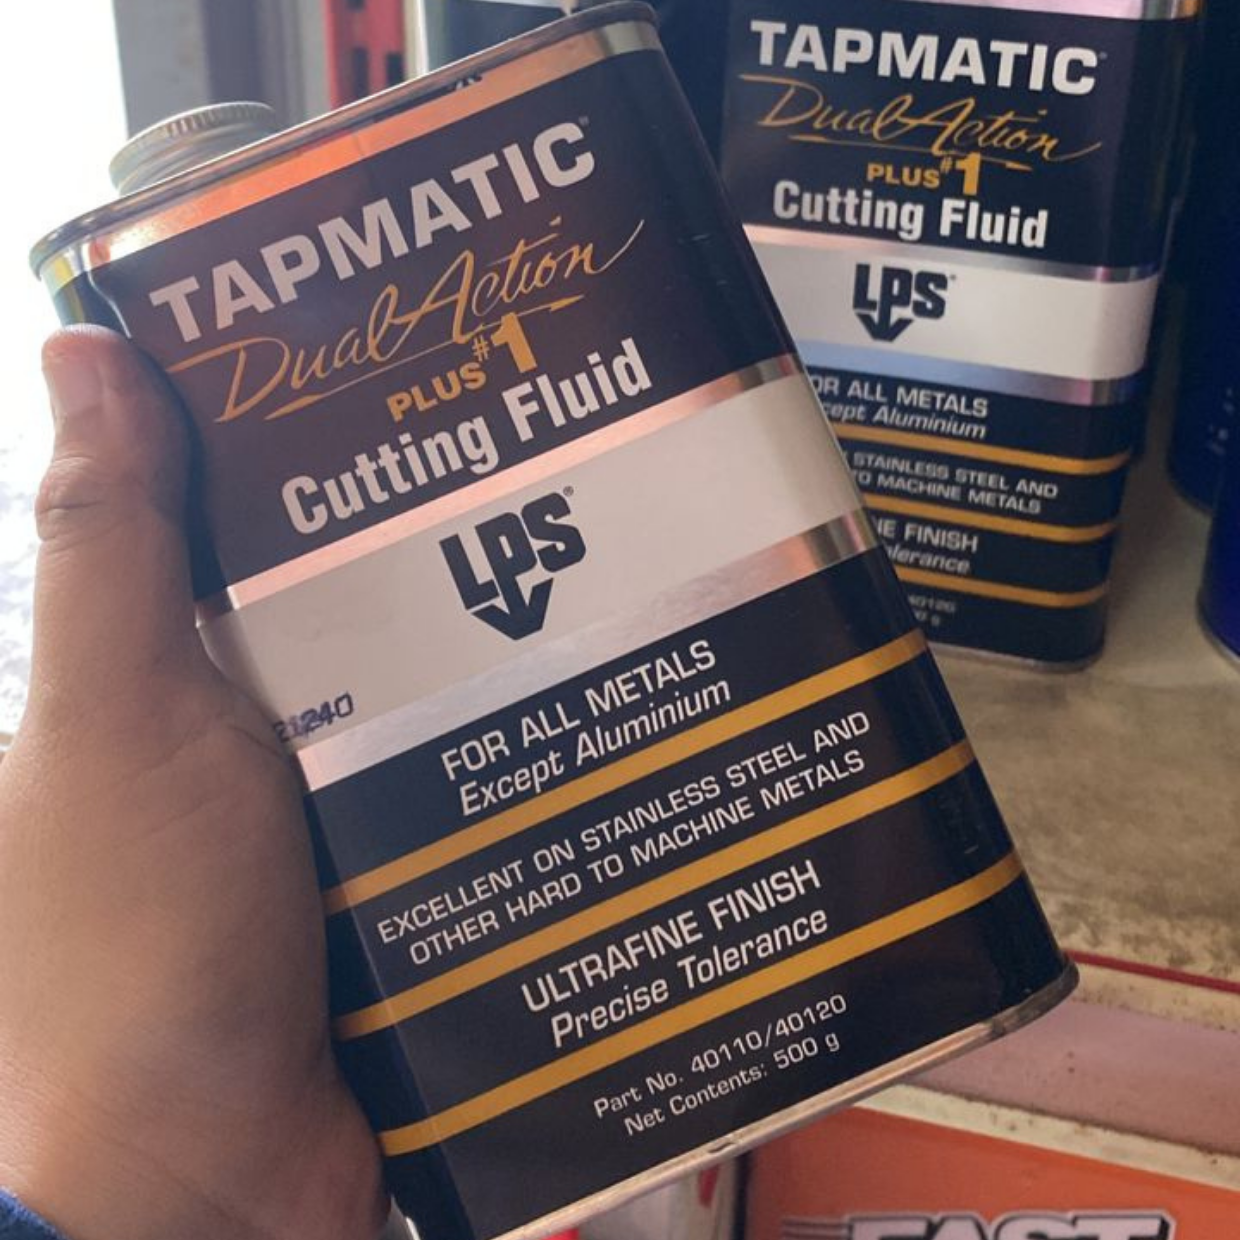 TAPMATIC DUAL ACTION PLUS #1 CUTTING FLUID